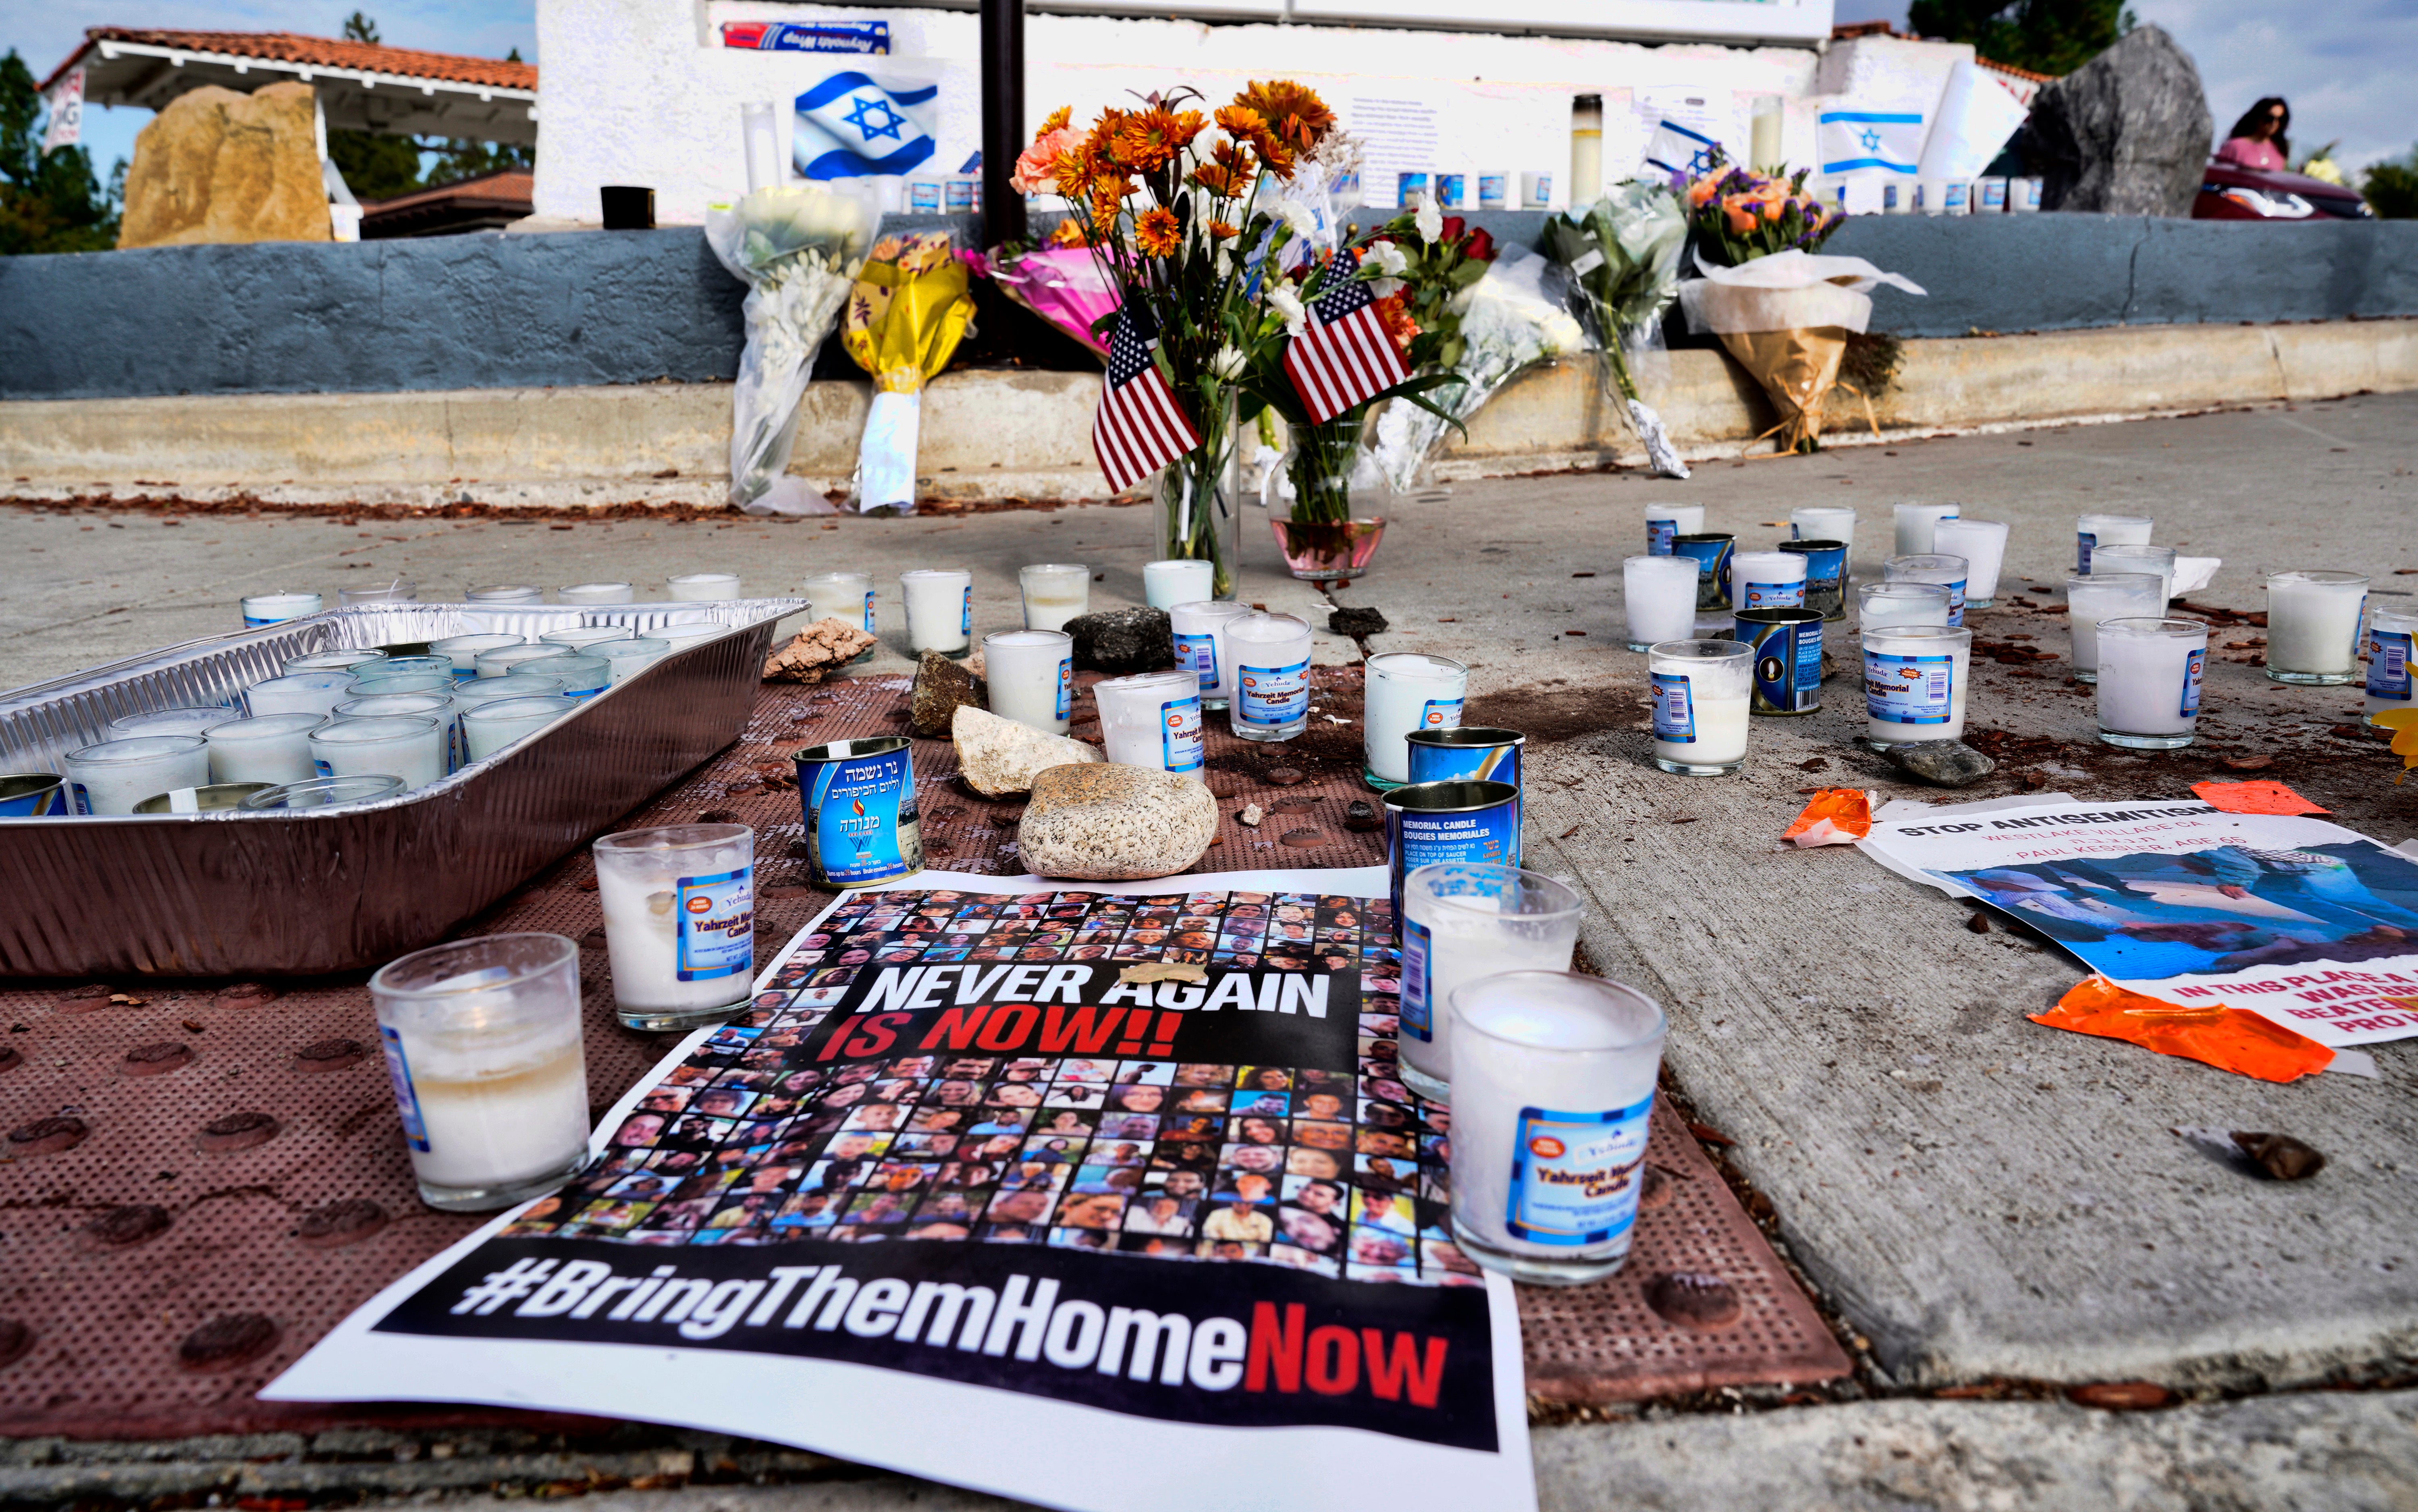 Flowers and candles are left at a makeshift shrine placed at the scene of a Sunday confrontation that lead to death of a demonstrator, Tuesday, Nov. 7, 2023, in Thousand Oaks, Calif.